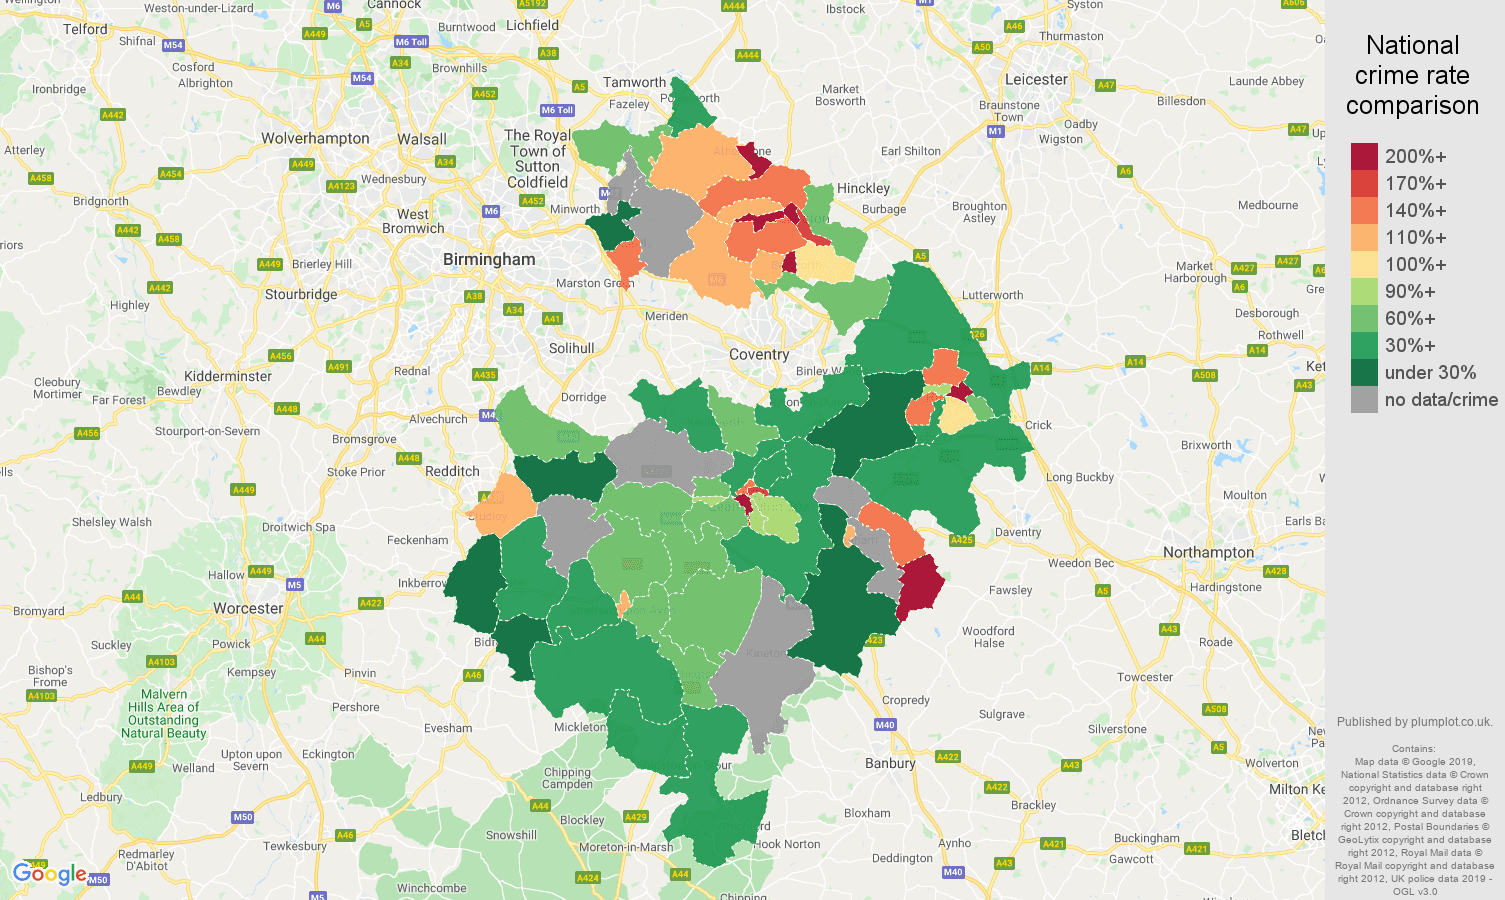 Warwickshire possession of weapons crime rate comparison map